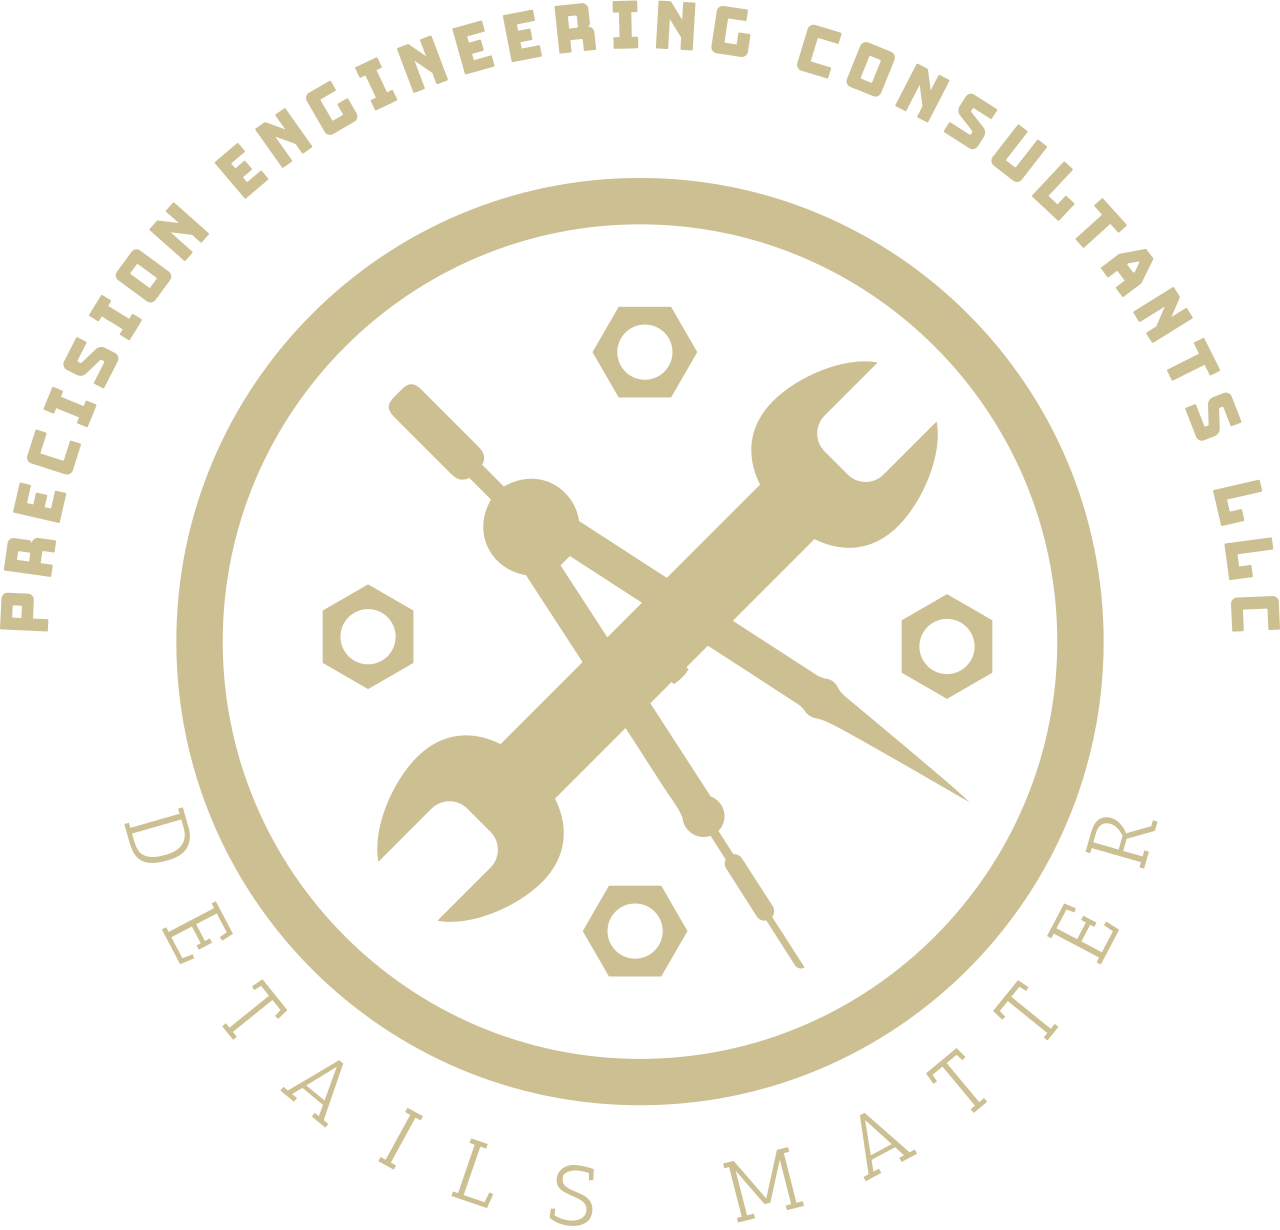 PRECISION ENGINEERING CONSULTANTS LLC's web page